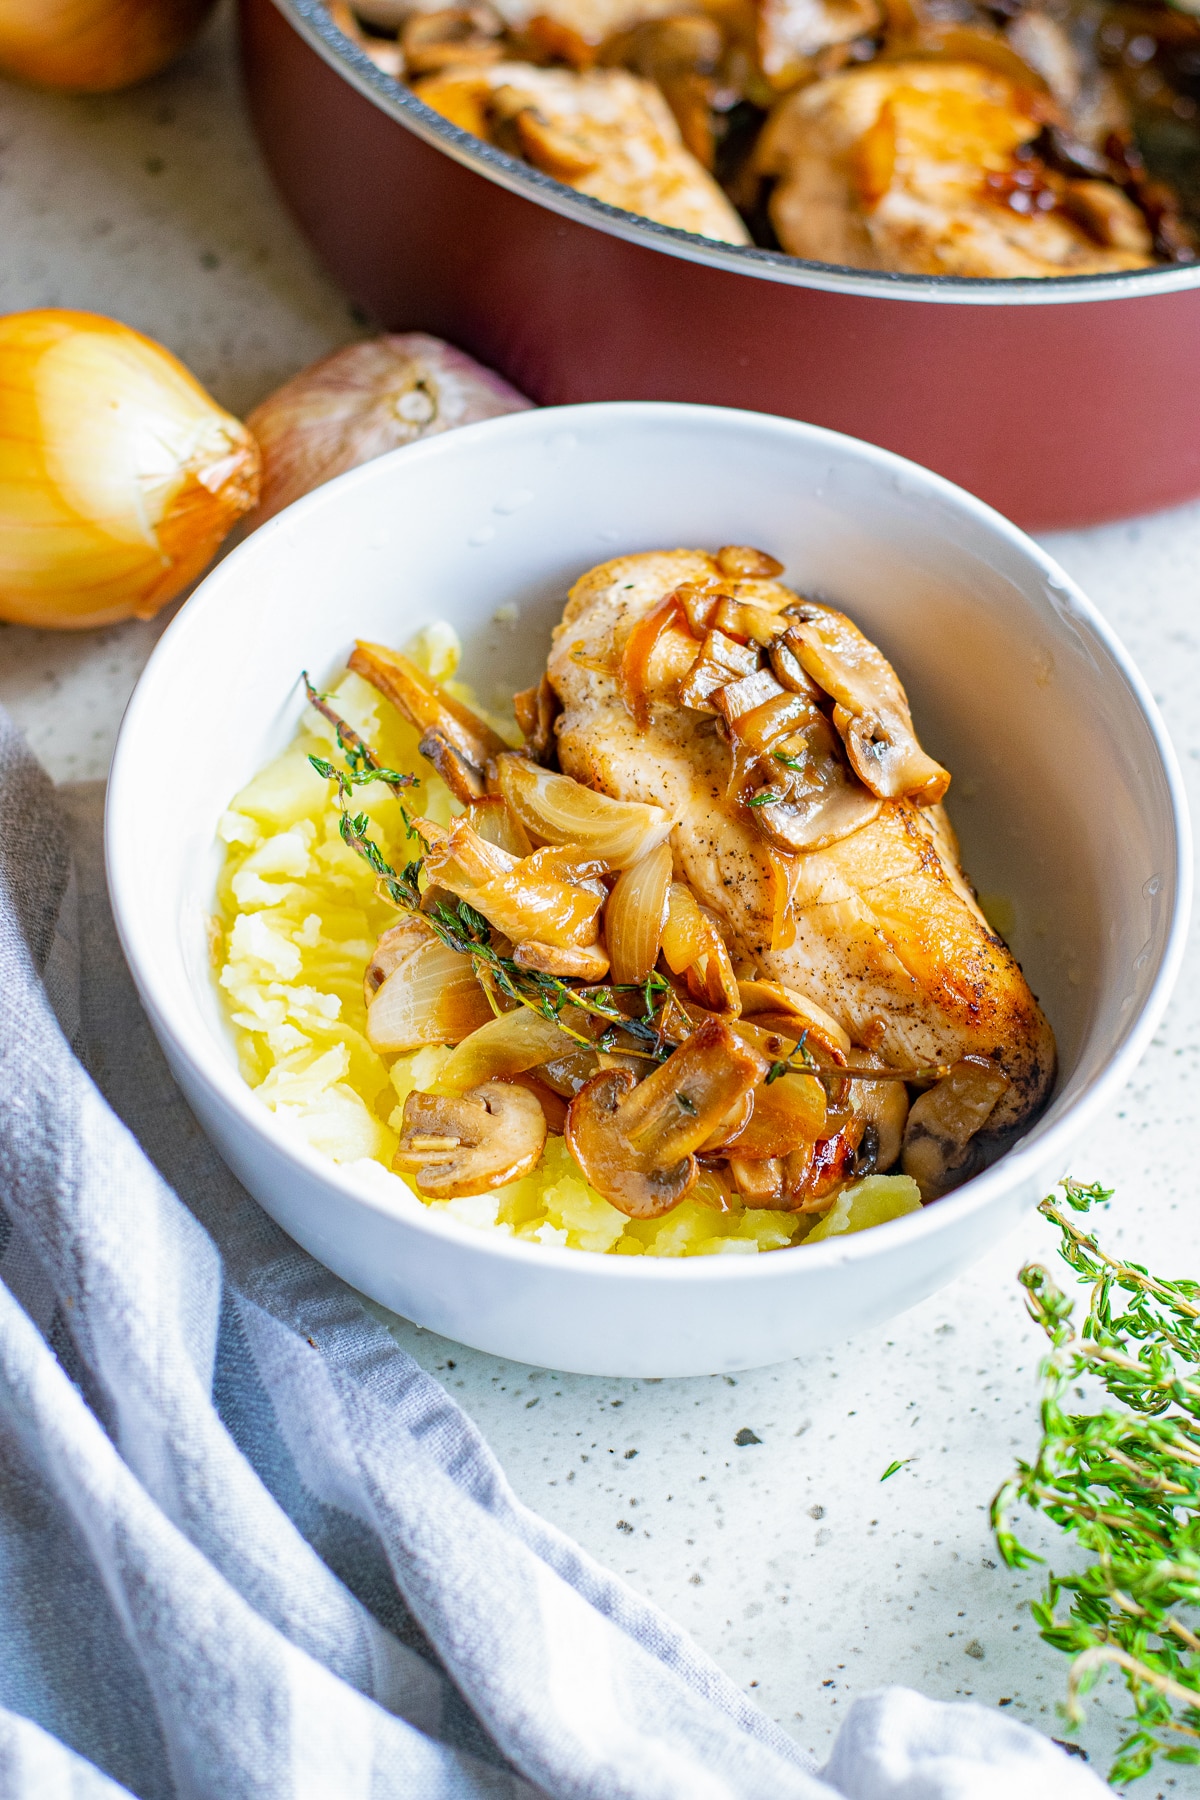 Bowl of Chicken with Mushrooms over mashed potatoes.